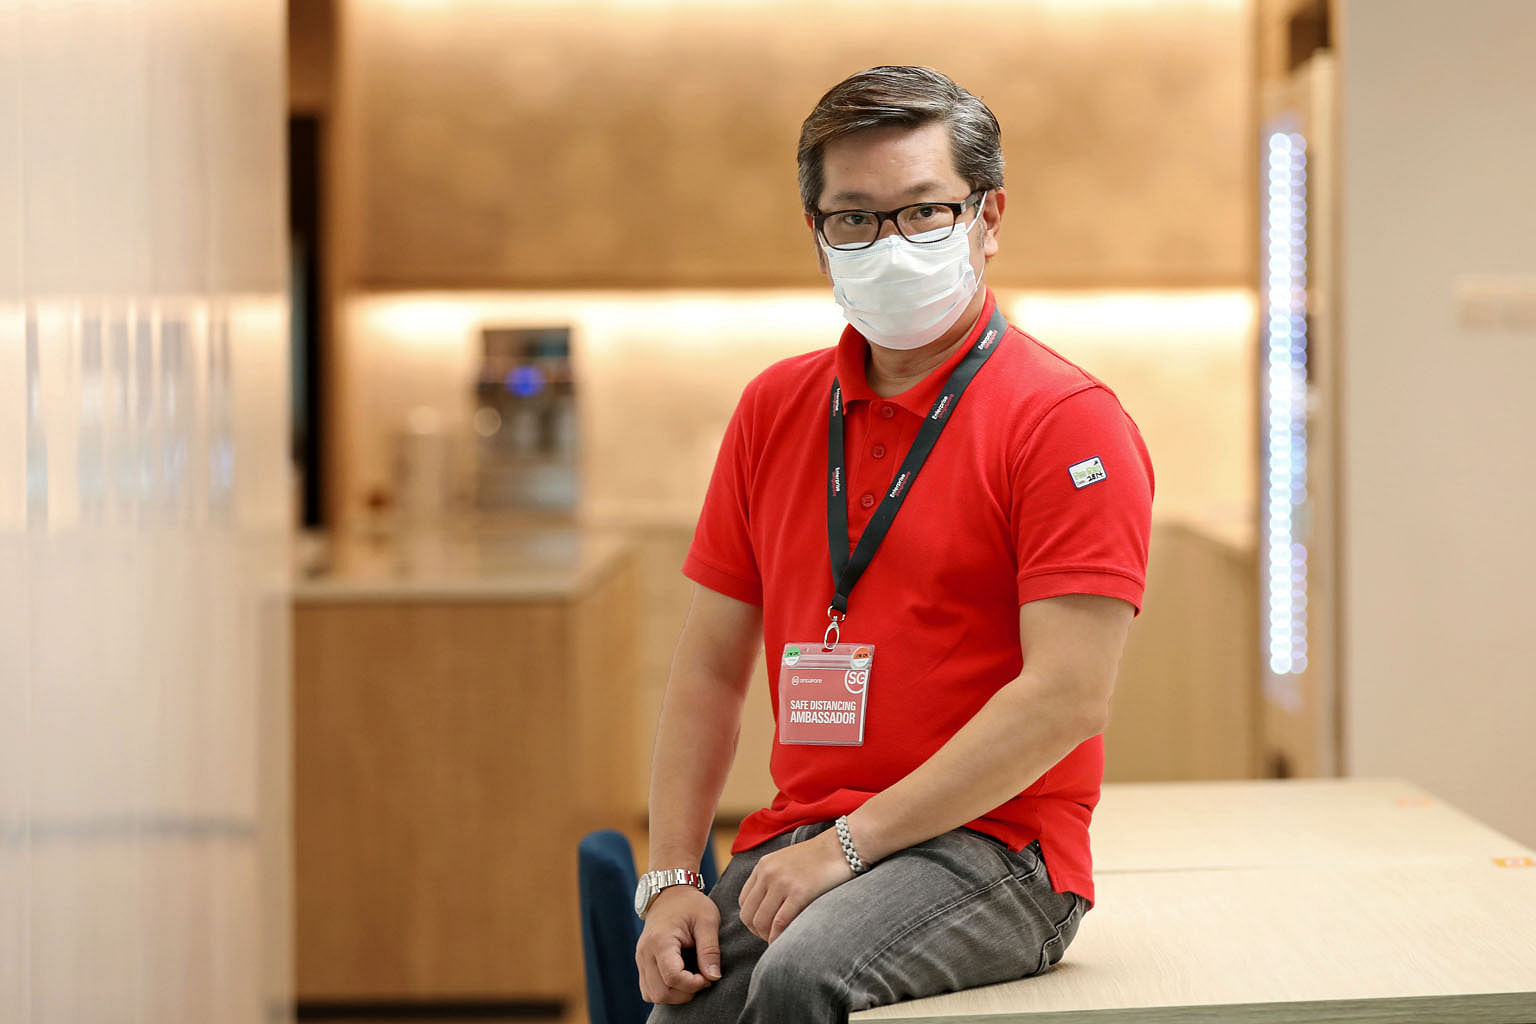 Mr Richard Lim, who works as a tour manager, signed up to be a safe distancing ambassador with Enterprise Singapore earlier this month, after the travel industry came to a halt. He now patrols Jurong Point mall five to six days a week.